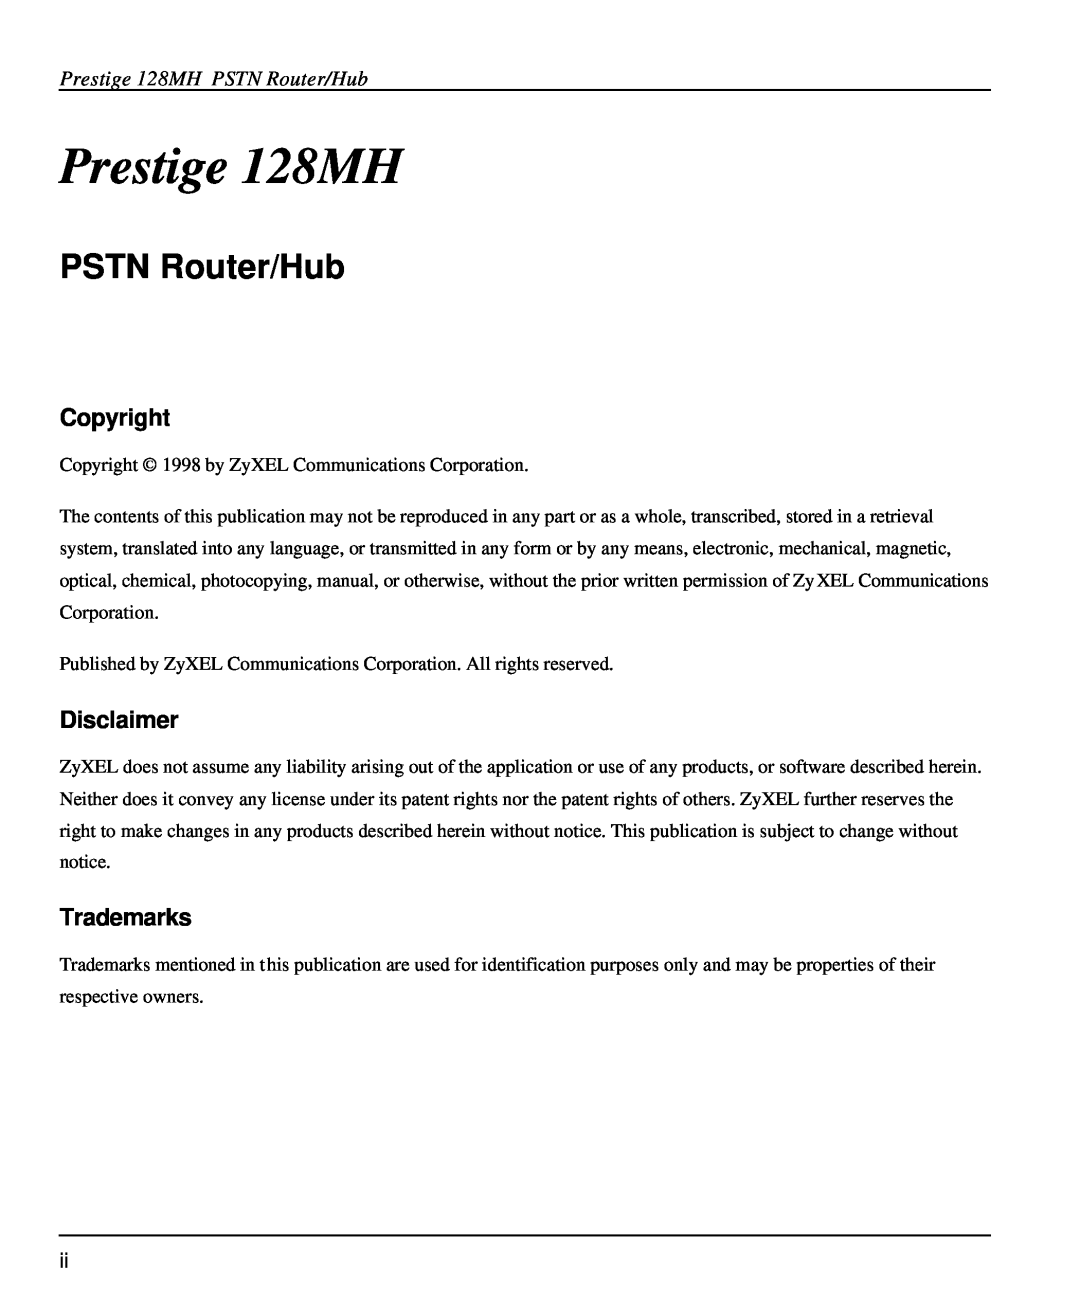 ZyXEL Communications user manual Copyright, Disclaimer, Trademarks, Prestige 128MH, PSTN Router/Hub 